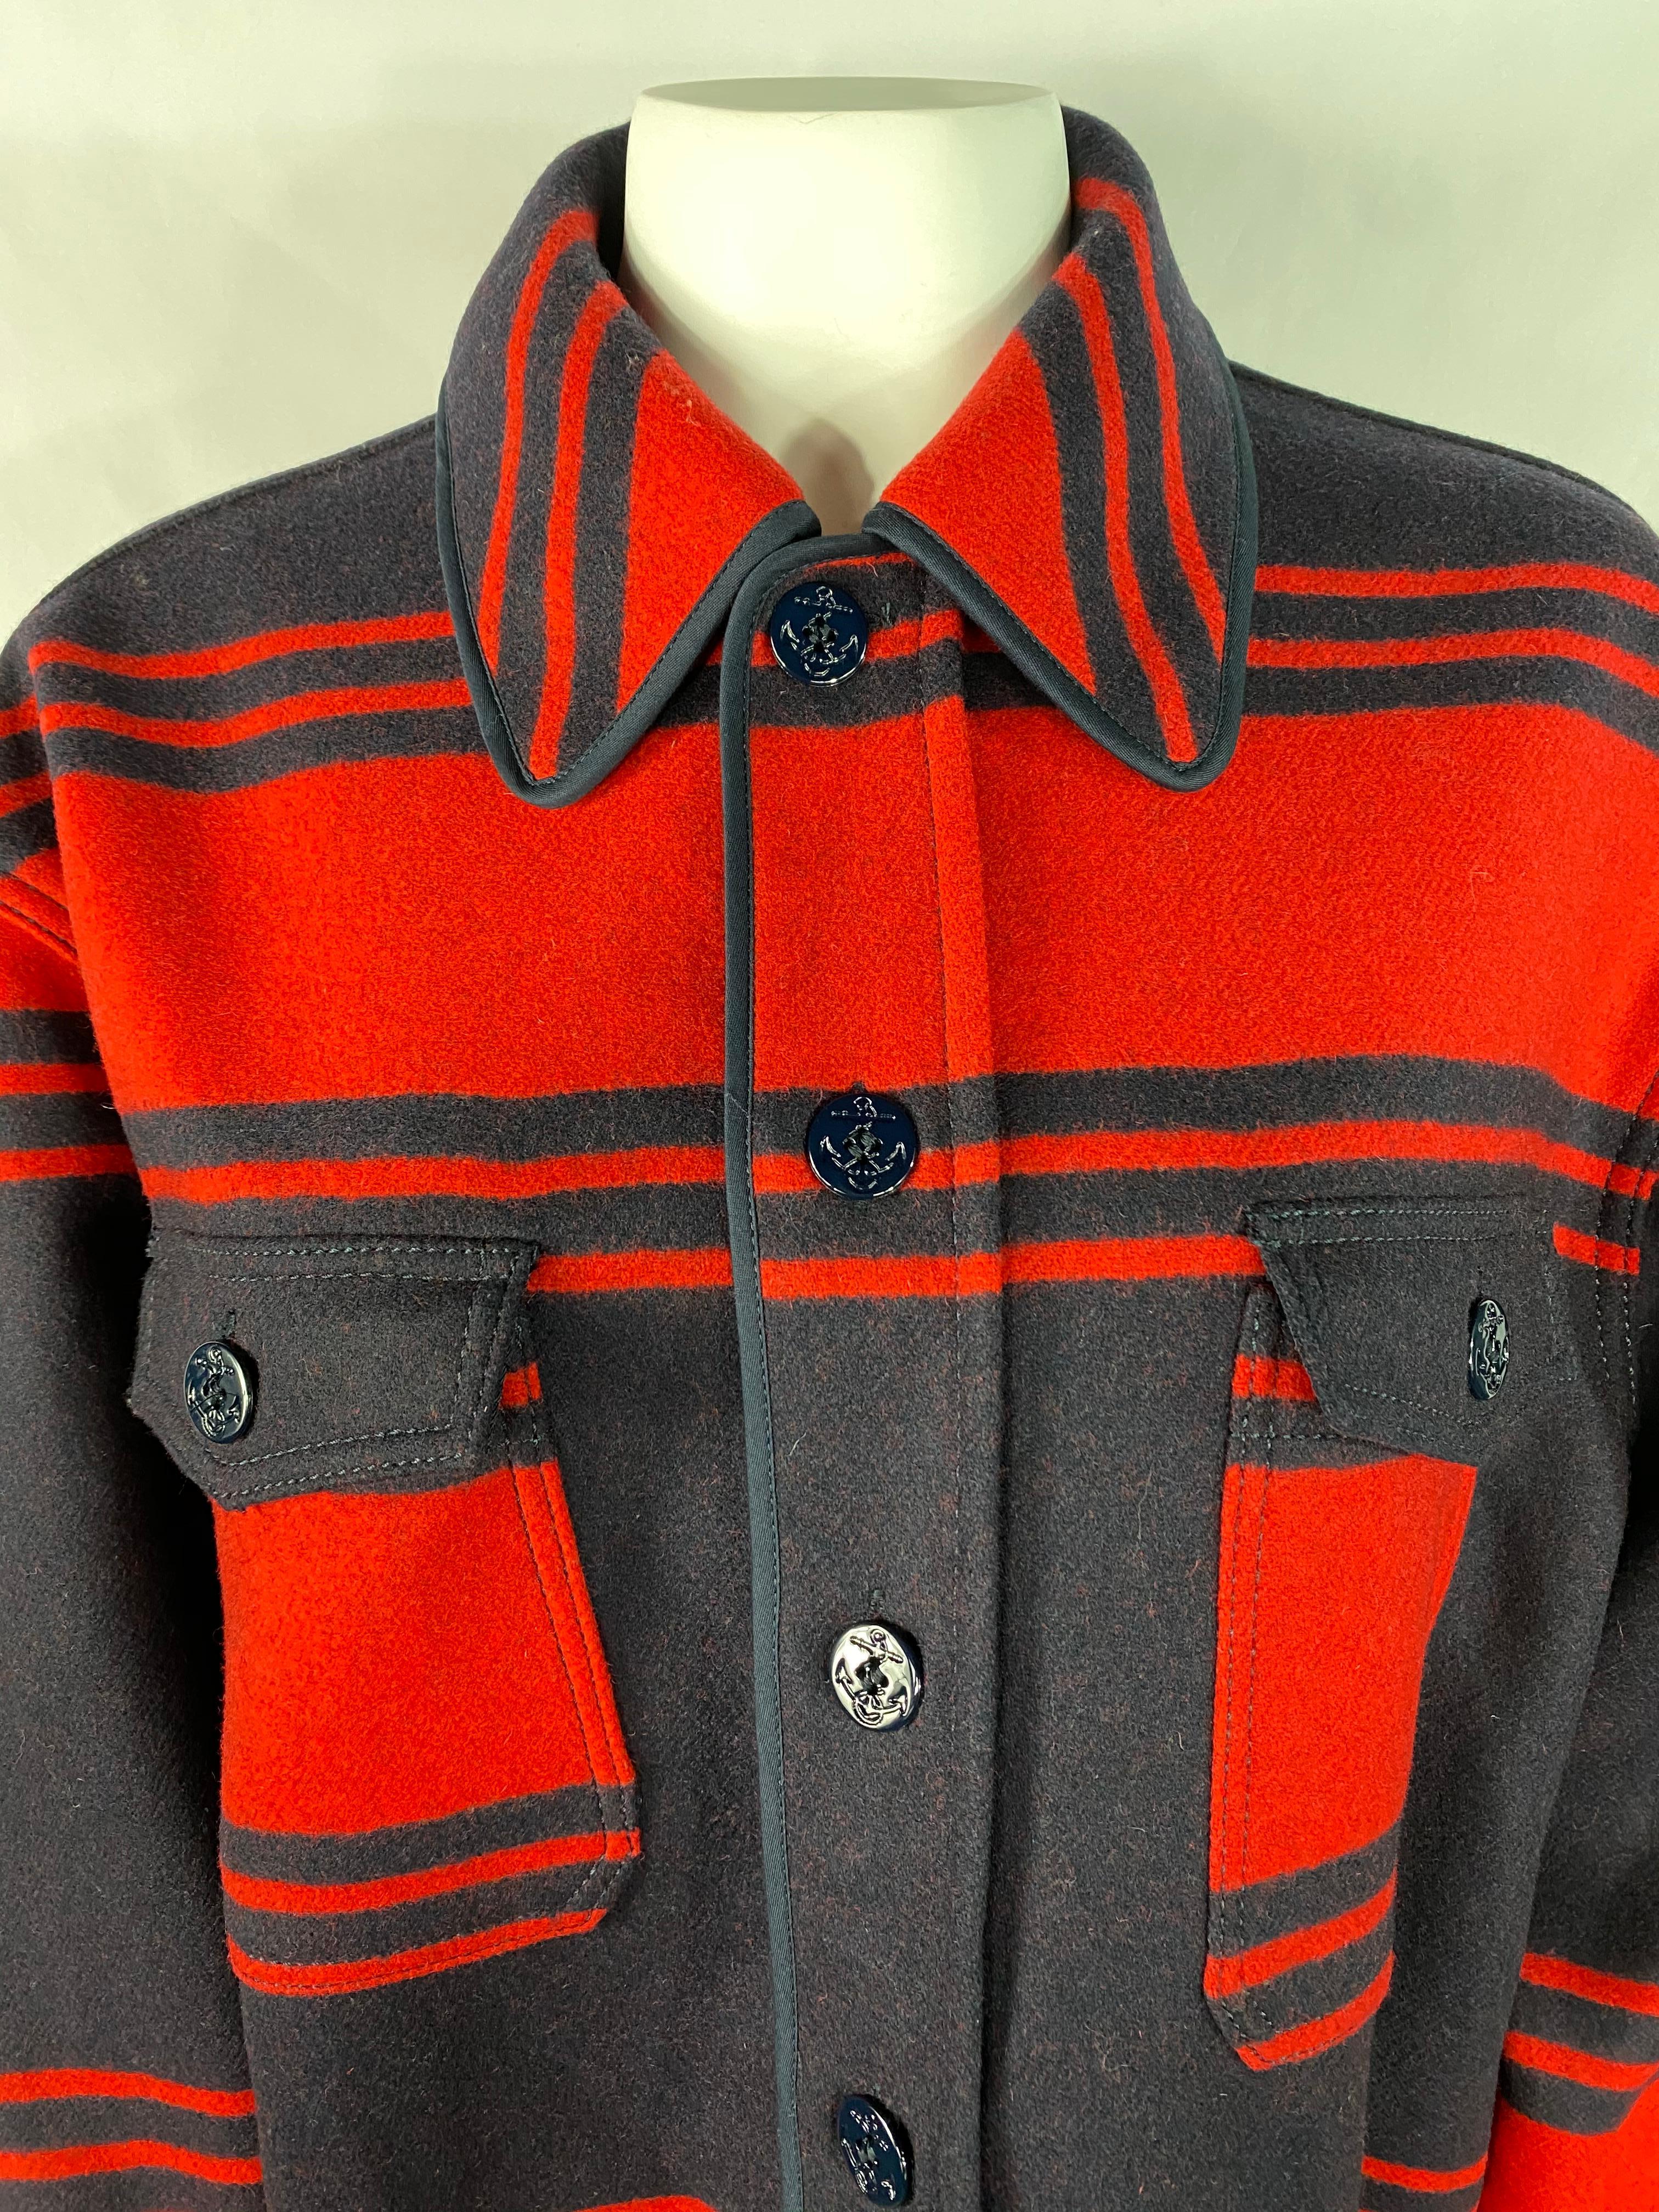 Product details:

Featuring navy and red wool striped pattern, front navy button down closure with collar and front dual pockets. The buttons designed with the anchor symbol.
Brand new, with tags.
Made in Italy.